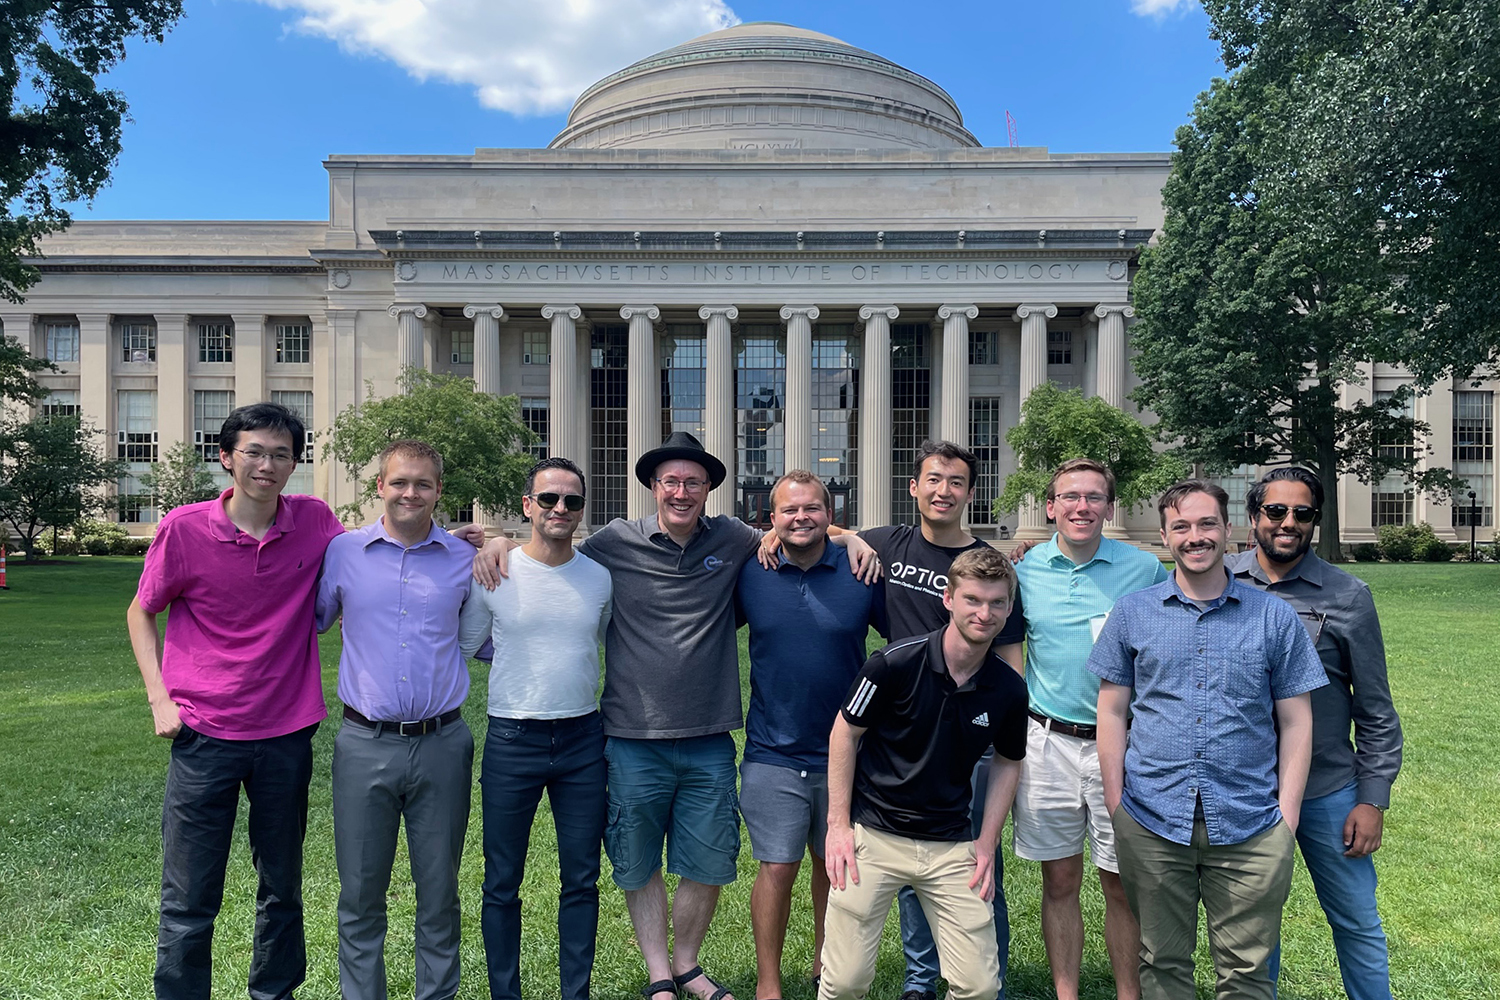 MeepCon convened at MIT in late July. Meep, a software package developed by MIT physicists, is widely used in the photonics community to research nano-optics and other electromagnetic systems.